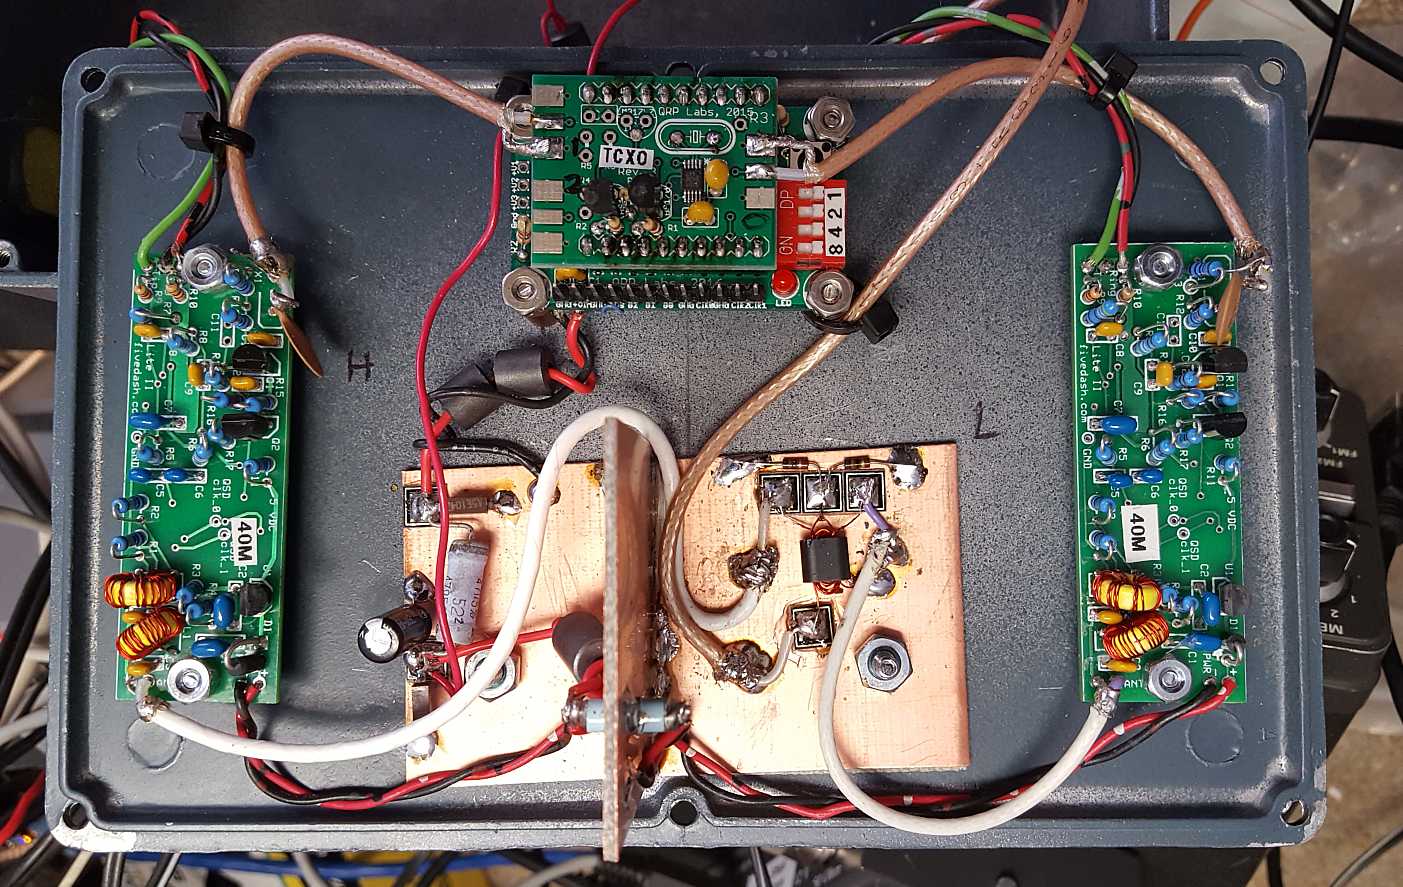 Inside the dual 40 meter receiver